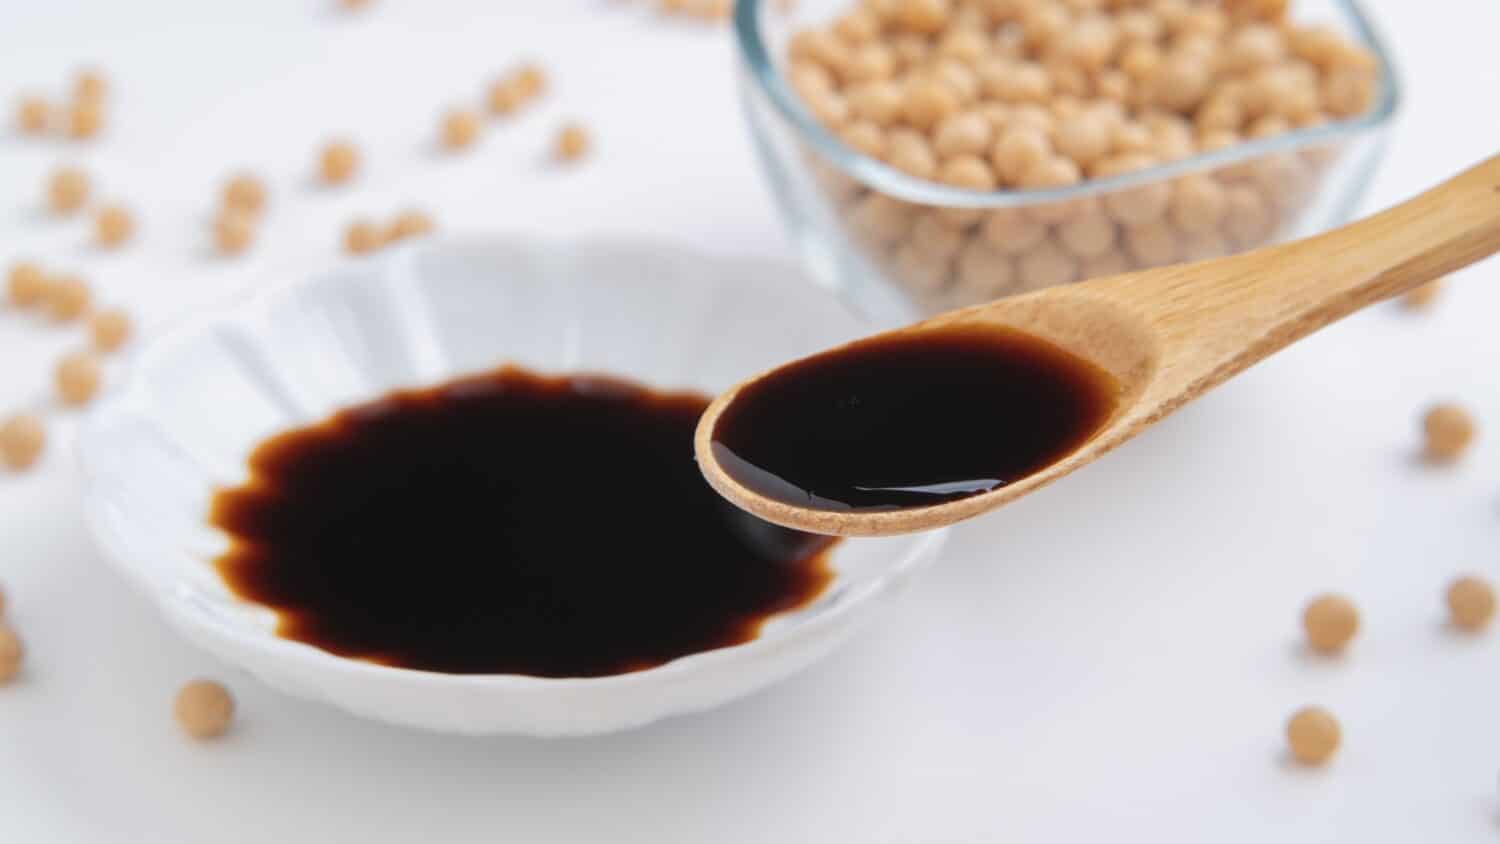 Japanese soy sauce and raw soybeans.